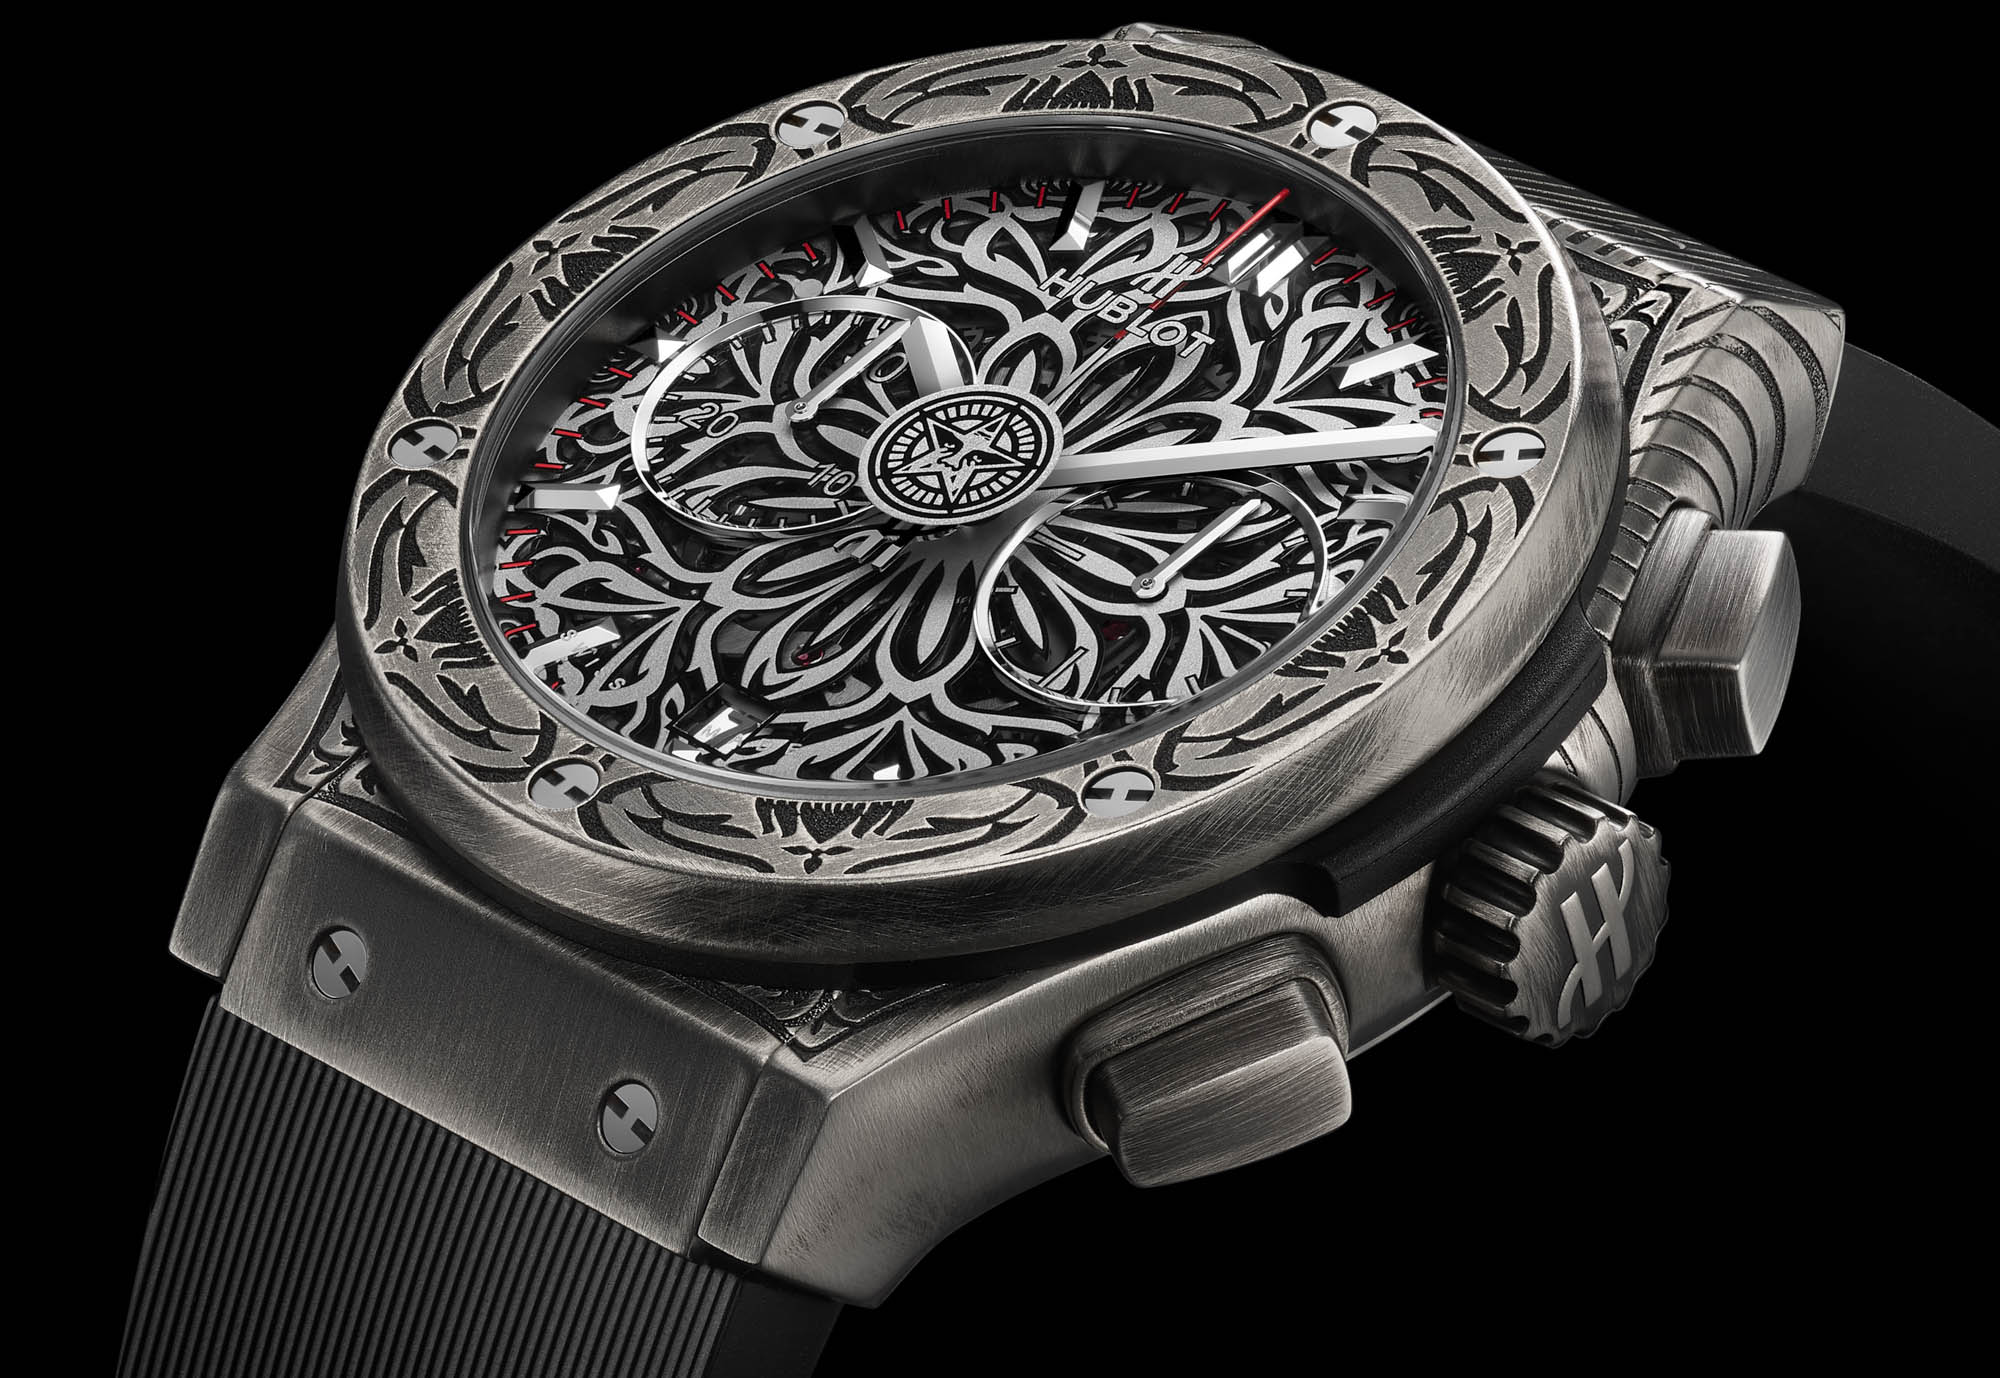 Hublot Classic Fusion Shepard Fairey Limited Edition Watch Engraved Artistic 3